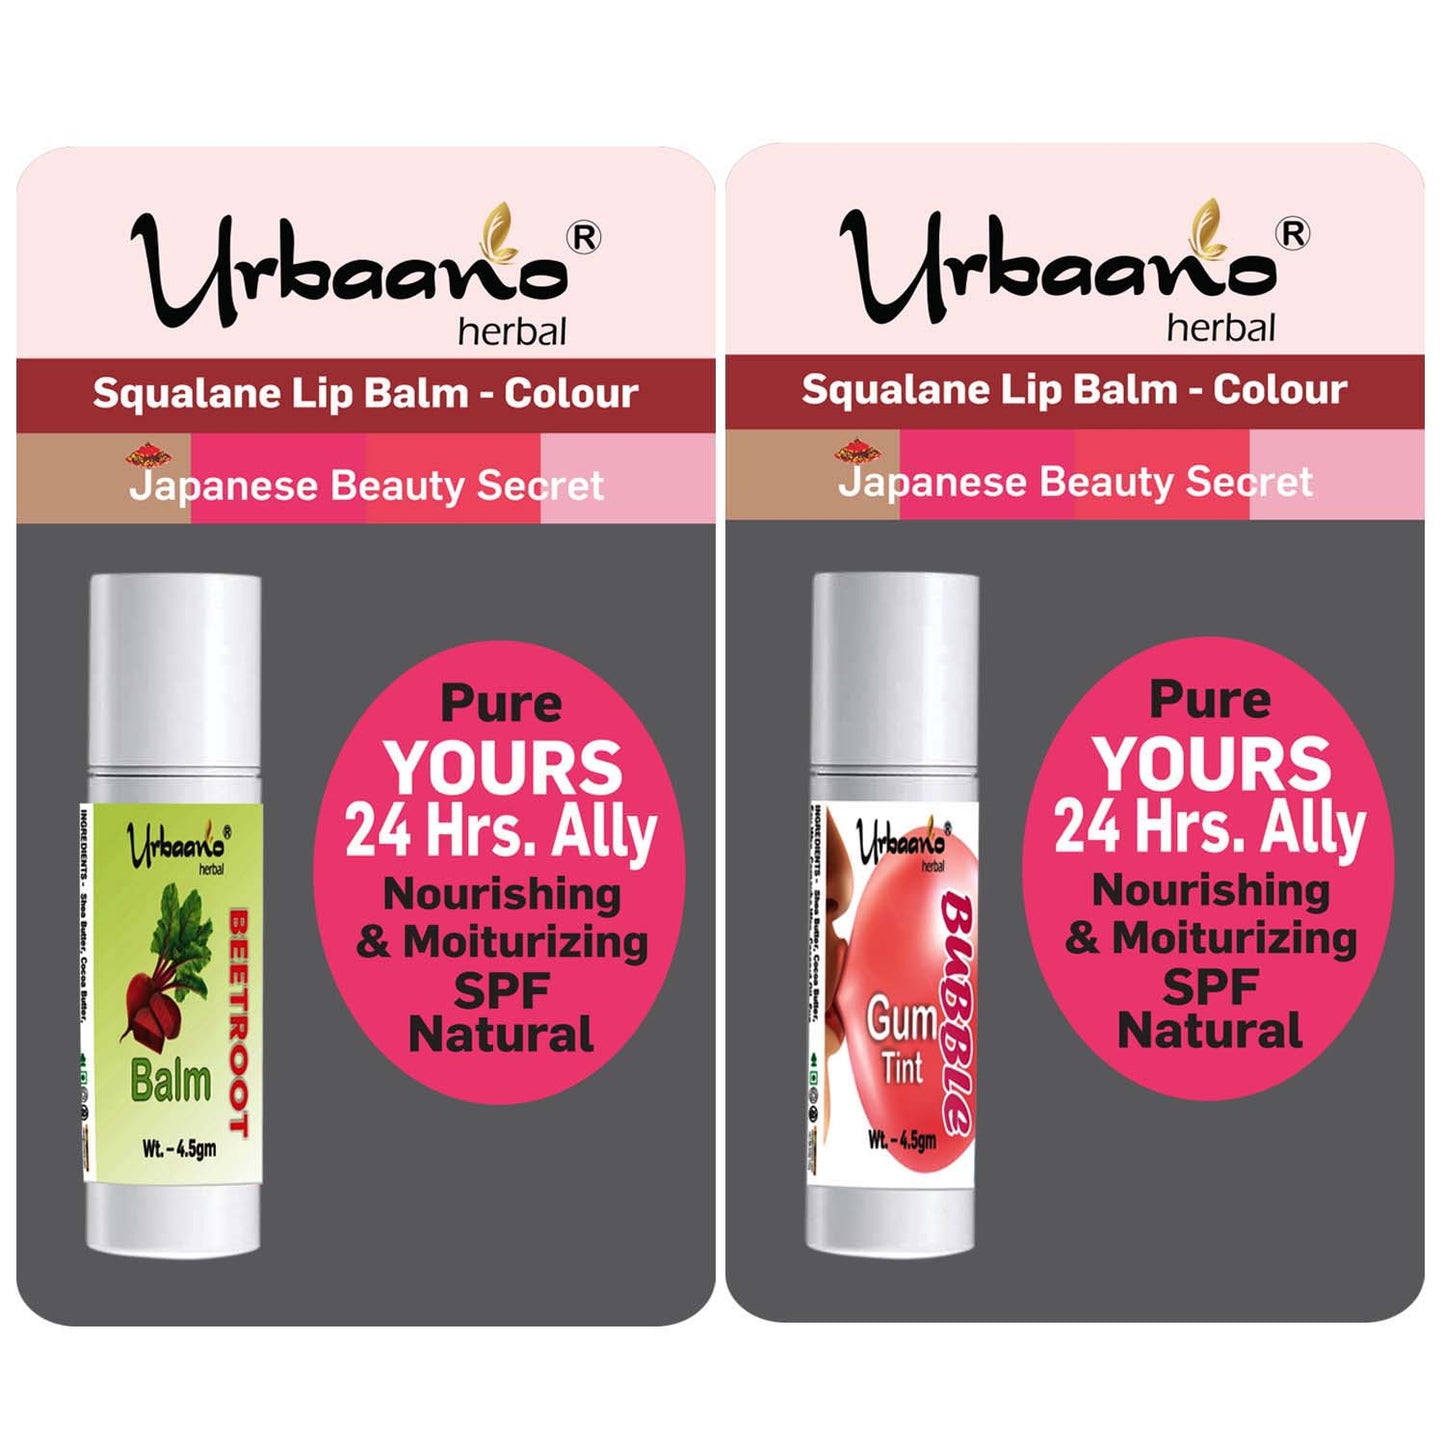 urbaano herbal tint lip and cheek balm for dry, chapped dark lips. Pink tint with olive squalane oil, organic oils